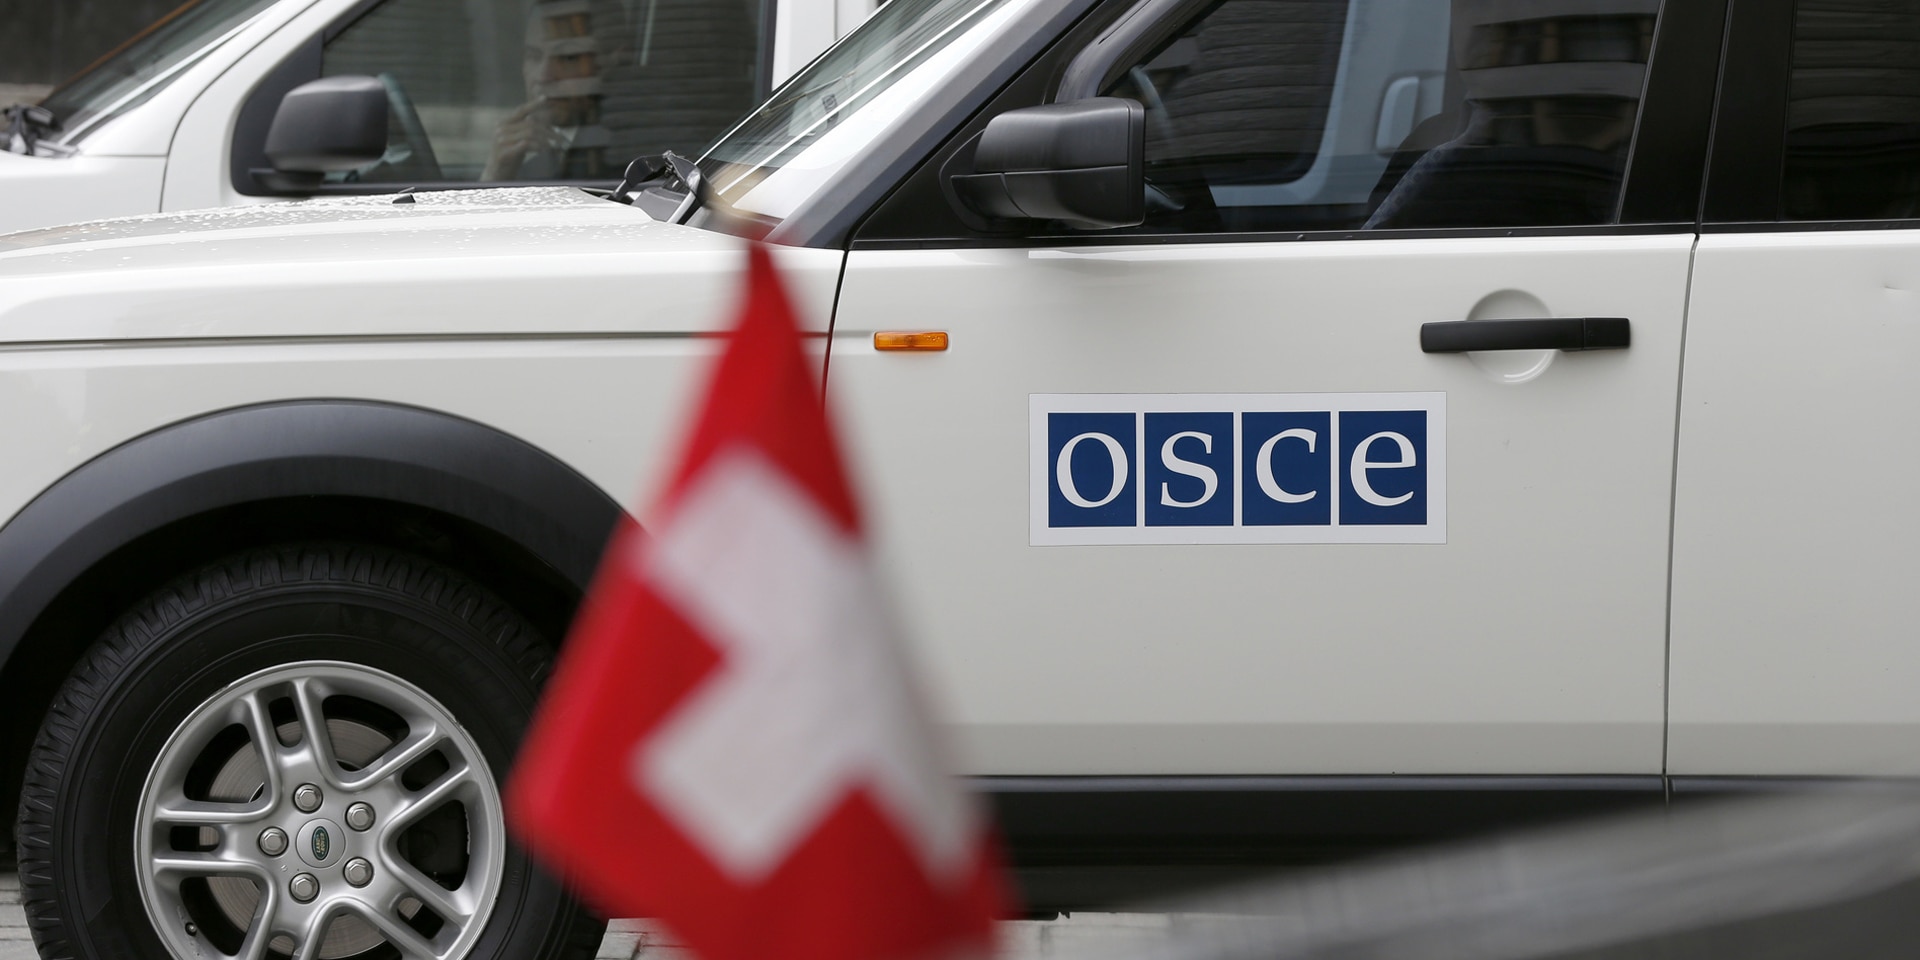 A white off-road vehicle labelled "OSCE" stands in front of a black car bearing the Swiss flag.